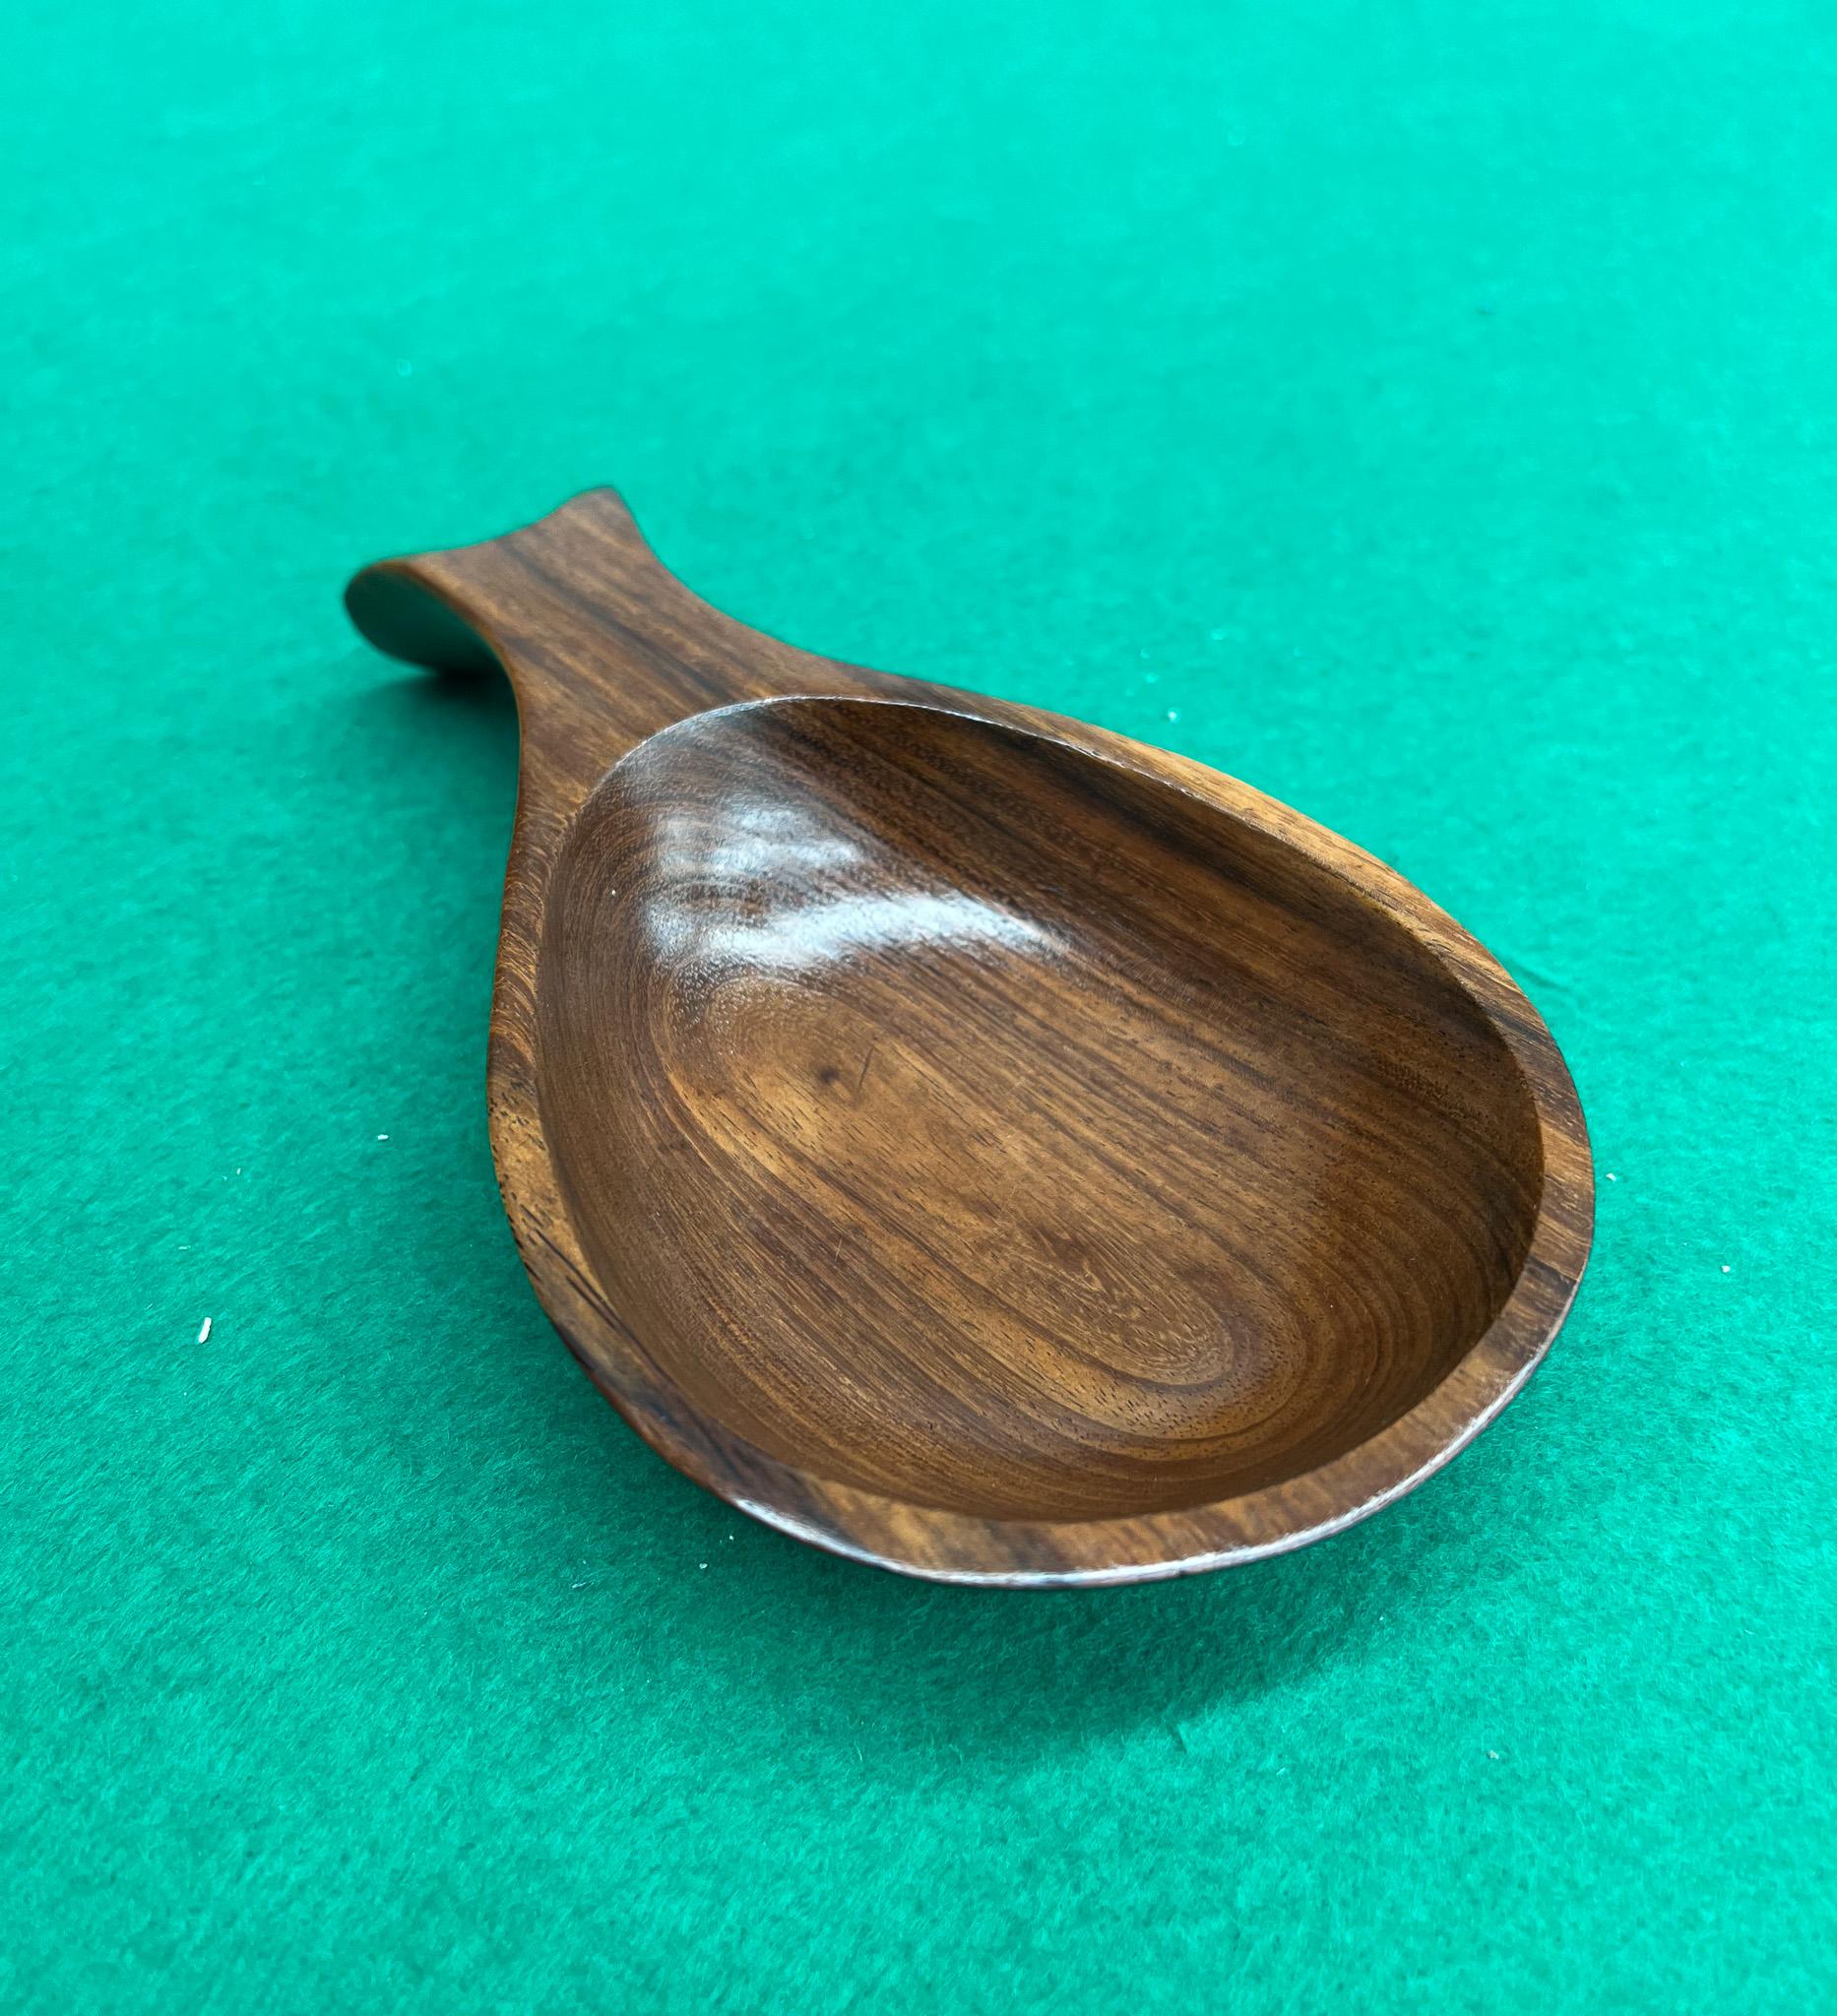 This bowl is handcrafted with Brazilian rosewood (also known as jacaranda) and features clean lines with elegant curves. The wood has a deep, dark, and rich tone with a stunning natural wood grain. The wood has also been refinished and is in